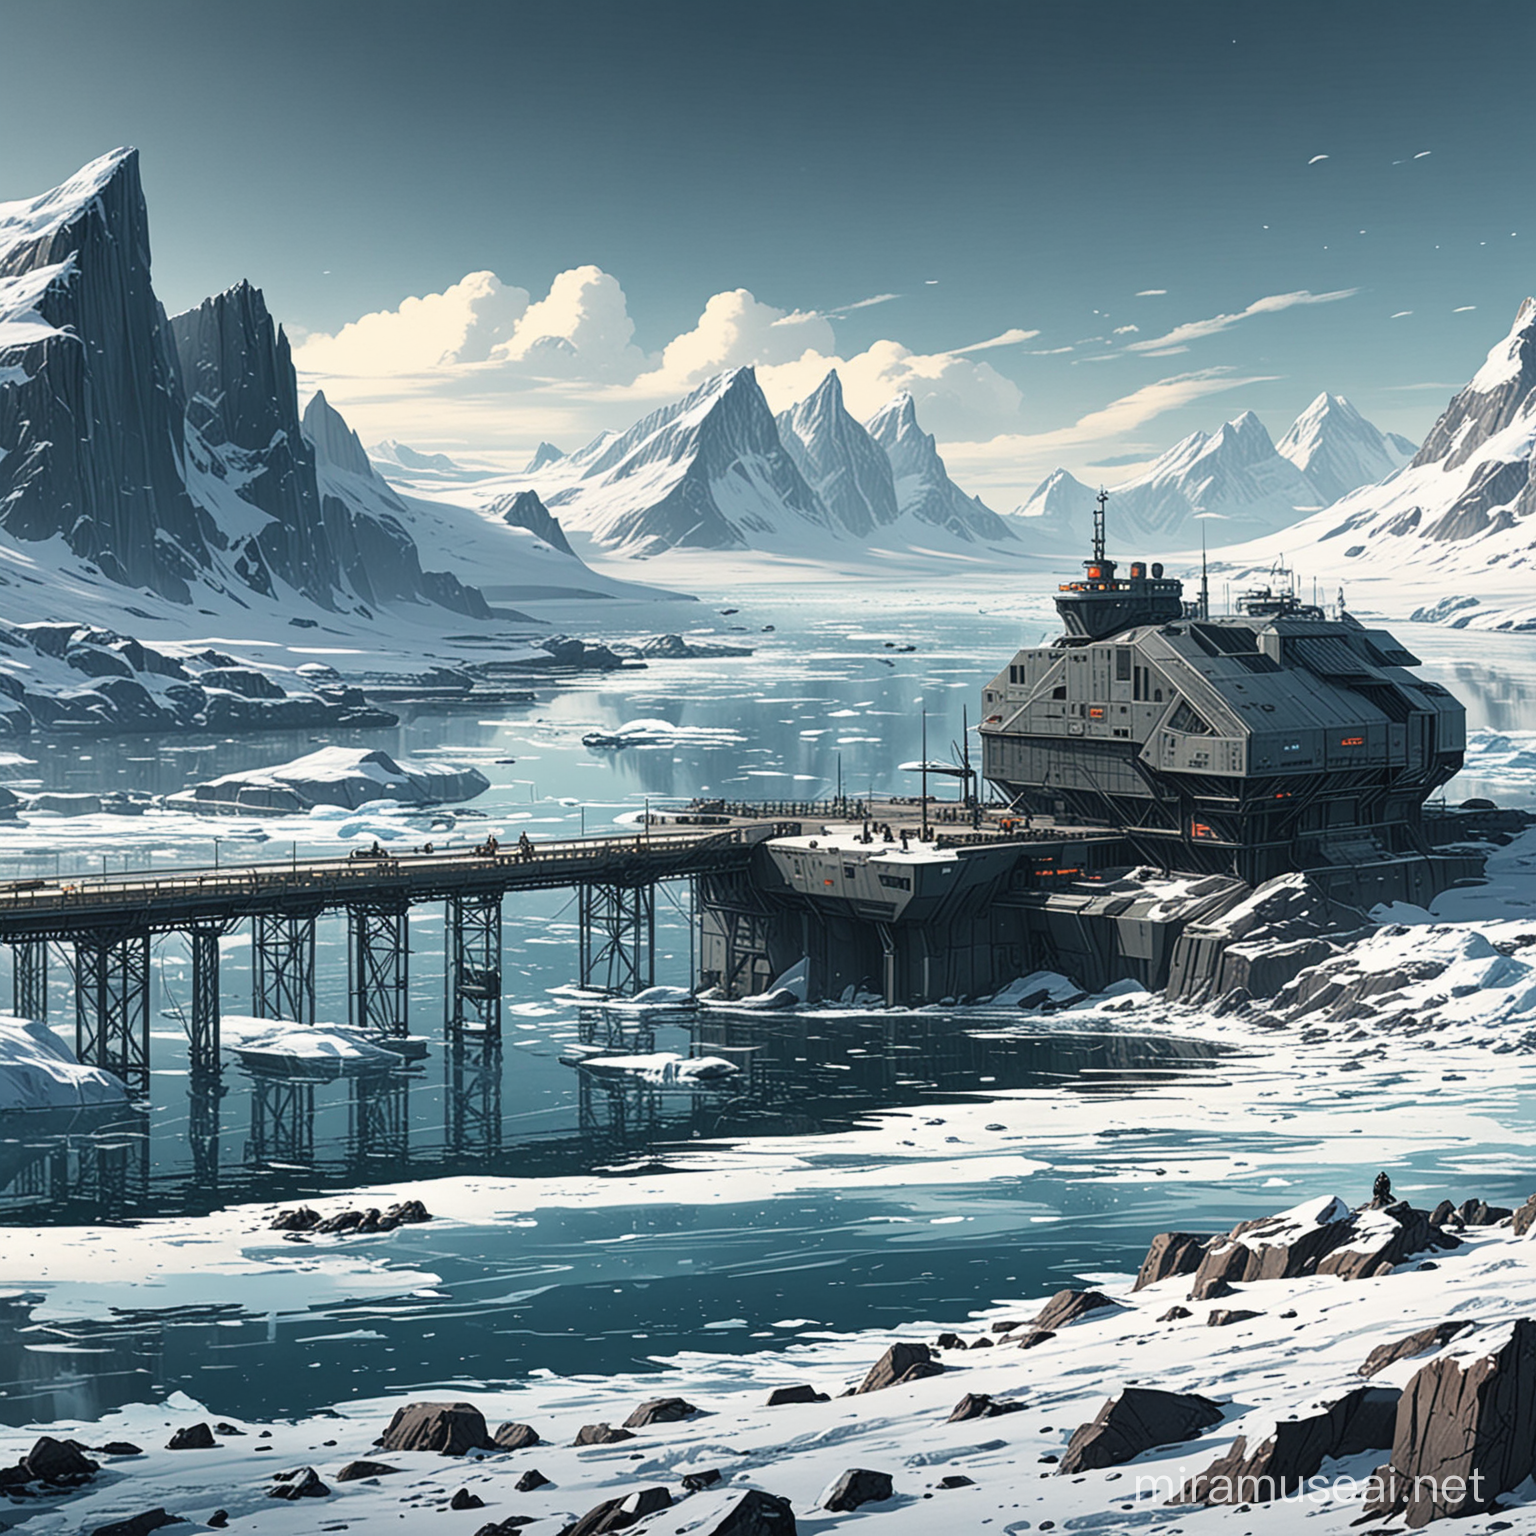 SciFi Dystopia Antarctic Port Station in Comics Style